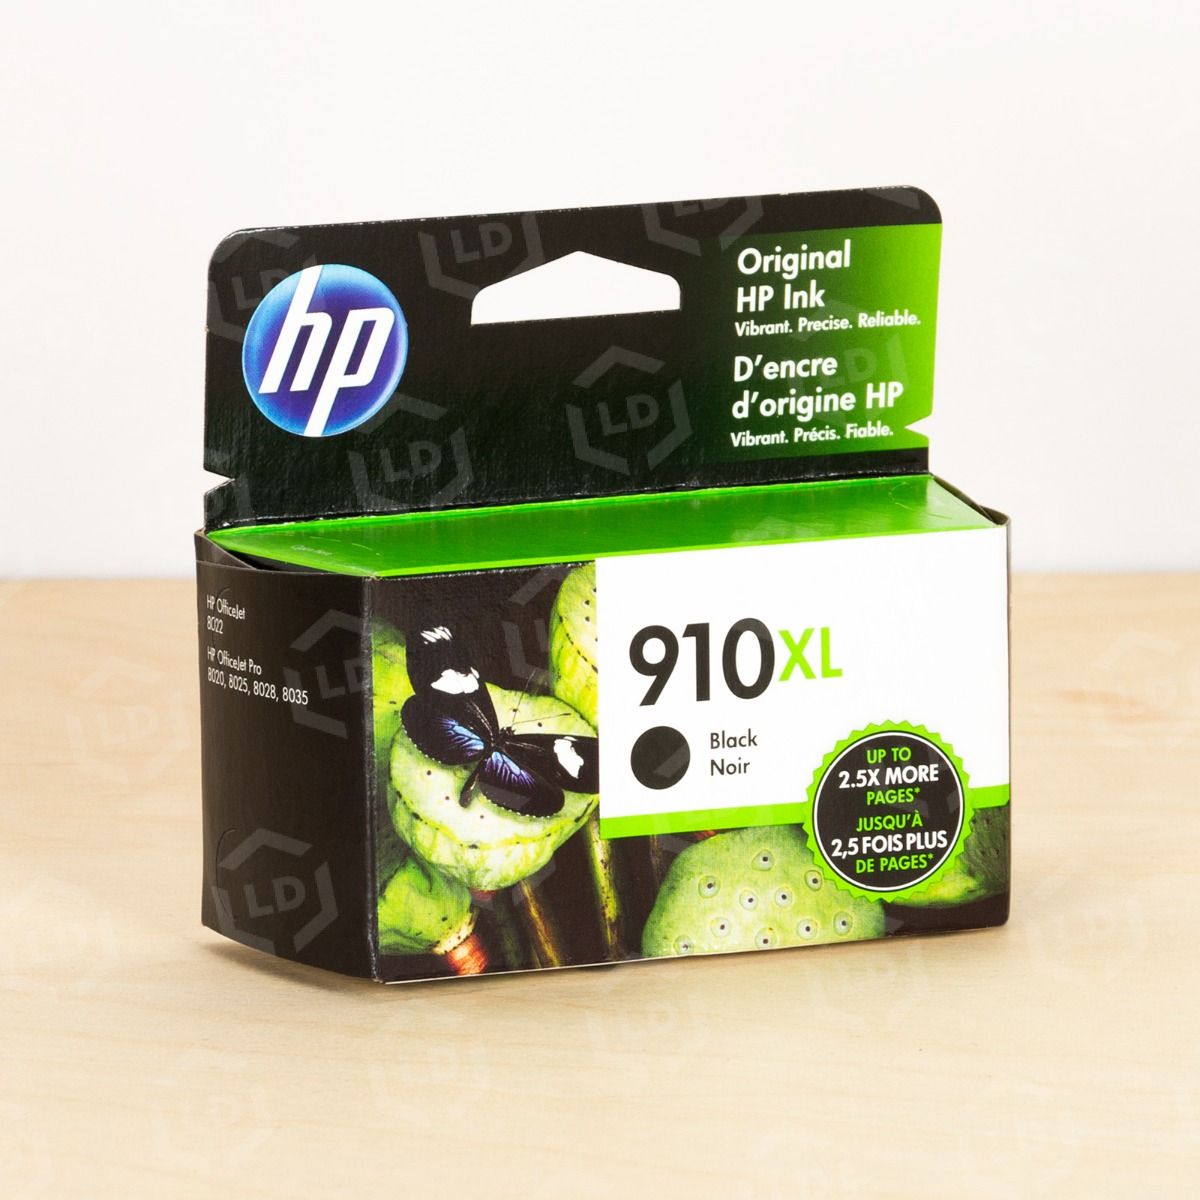 HP OfficeJet Pro 8022 review: Good, but not outstanding